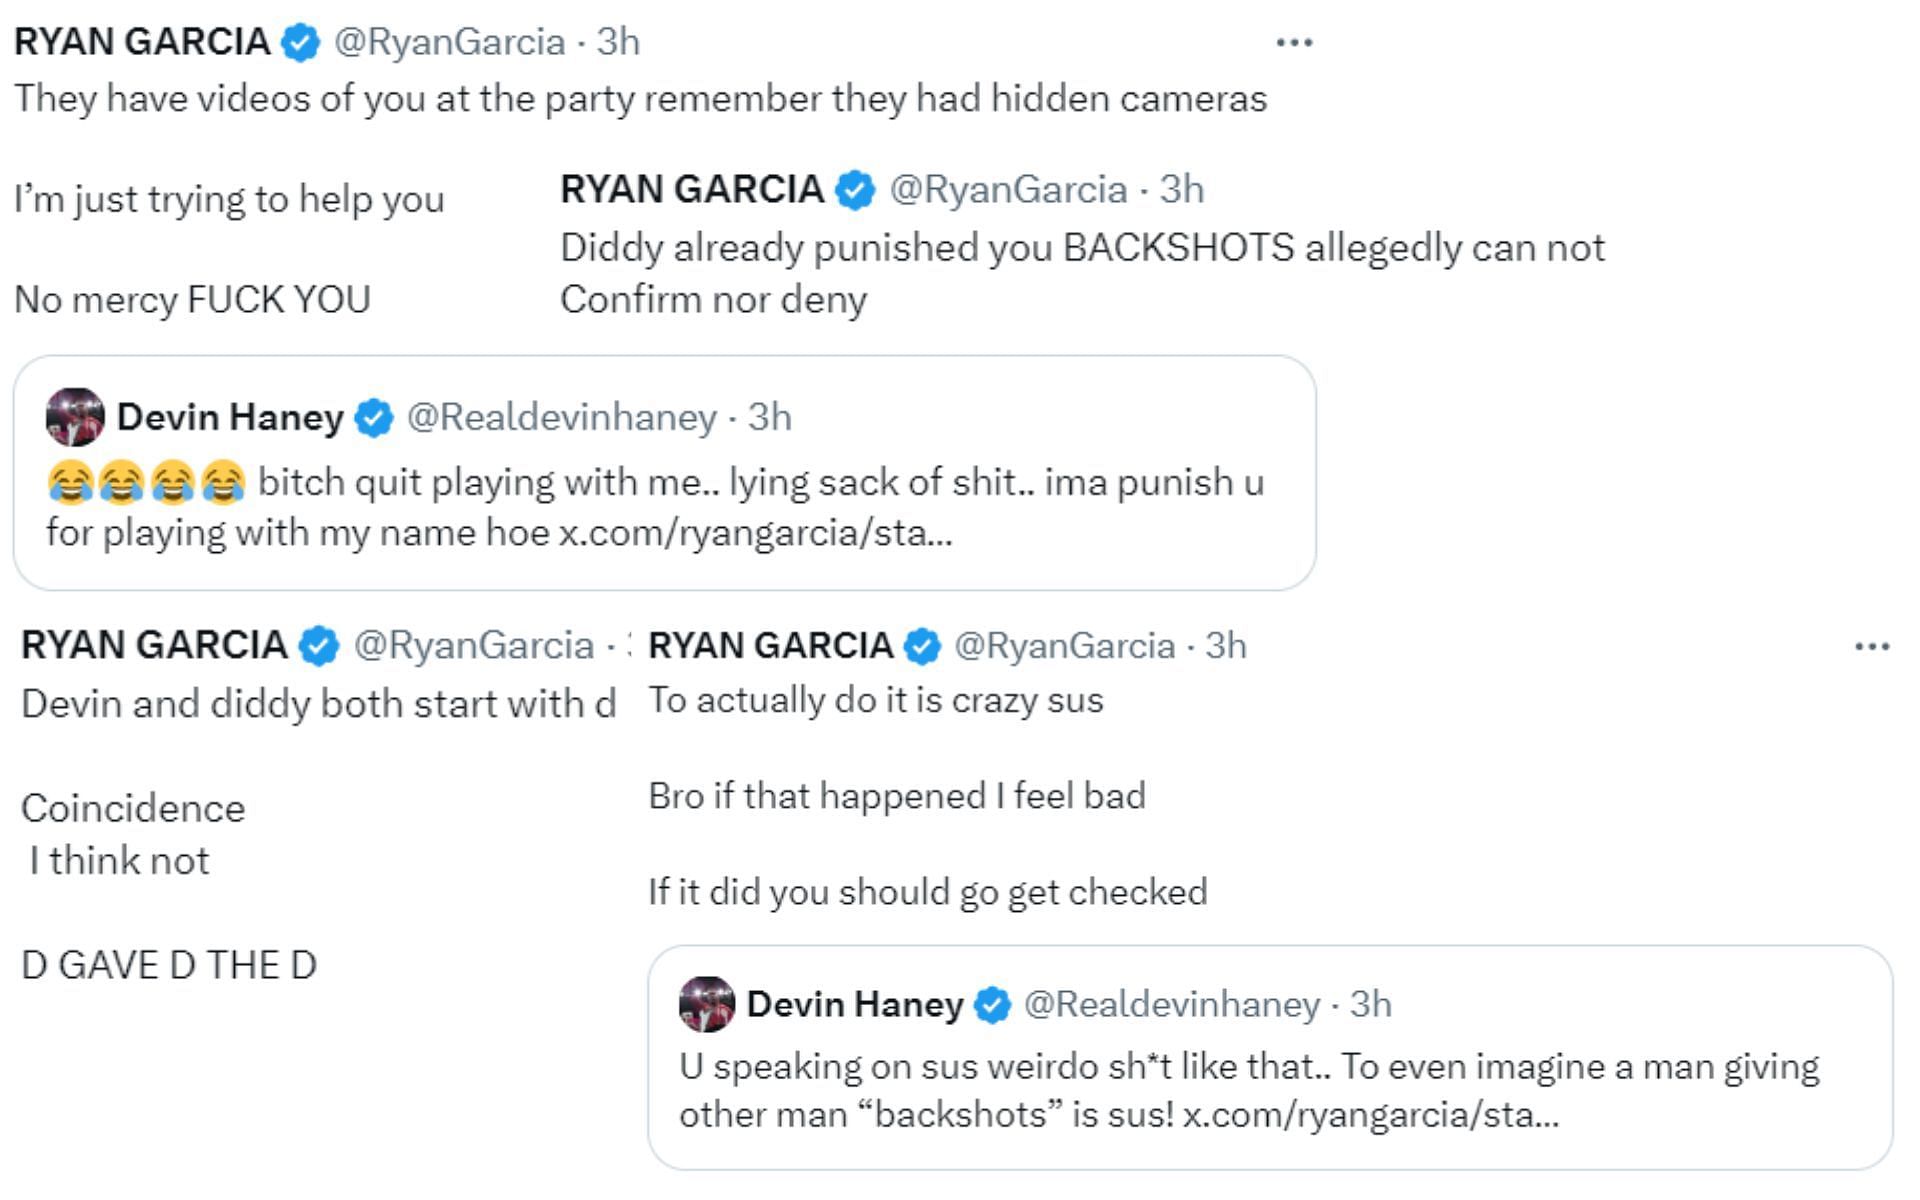 Screenshots from @RyanGarcia and @Realdevinhaney on X